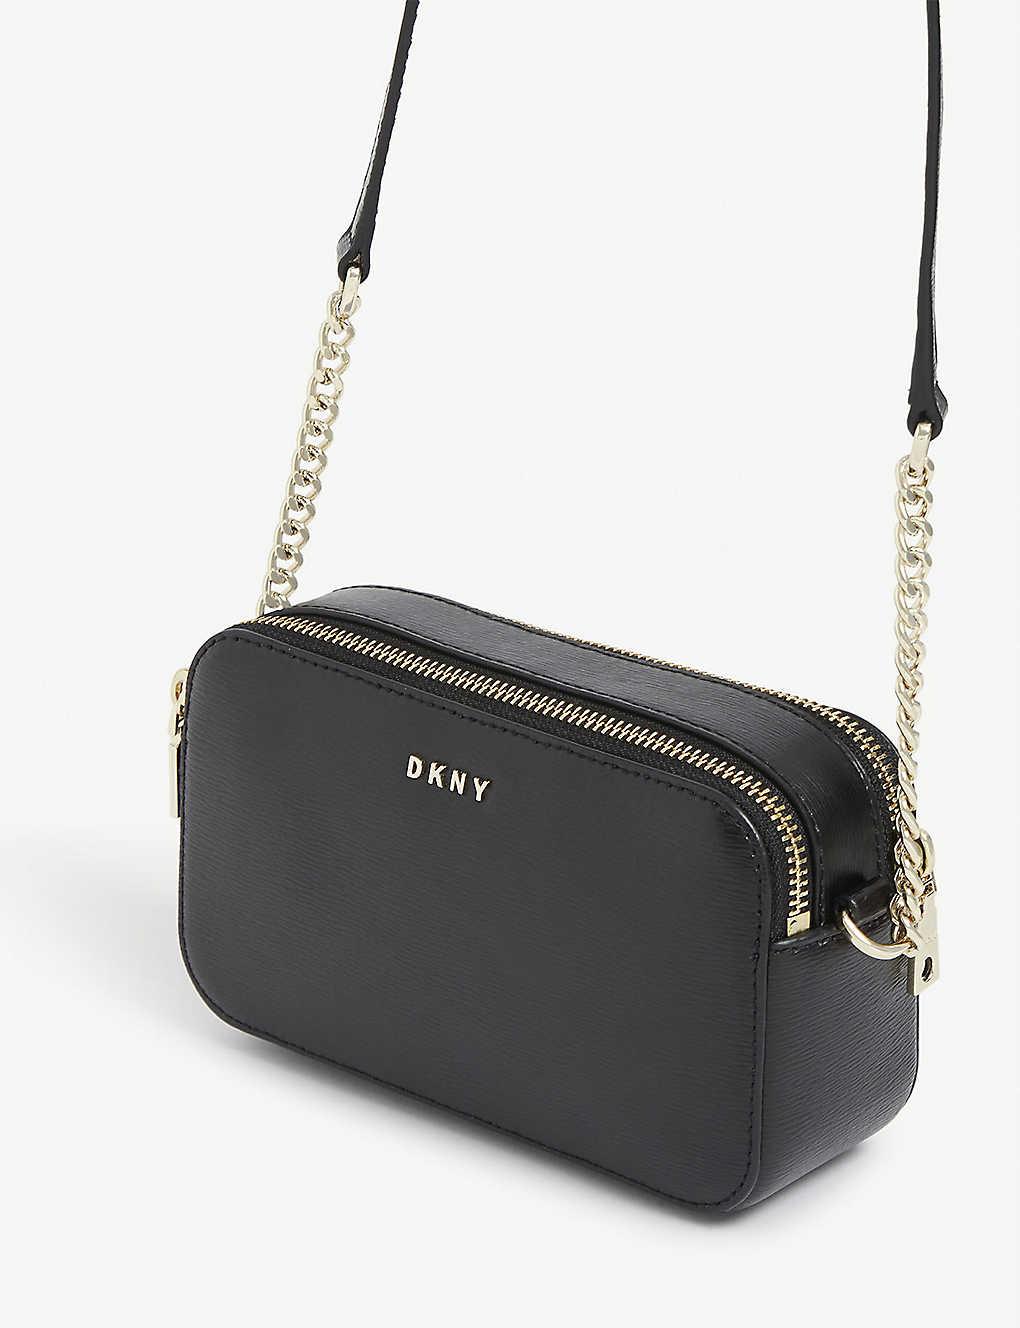 DKNY Bryant Double-zip Leather Camera Bag in Black / Gold (Black) | Lyst